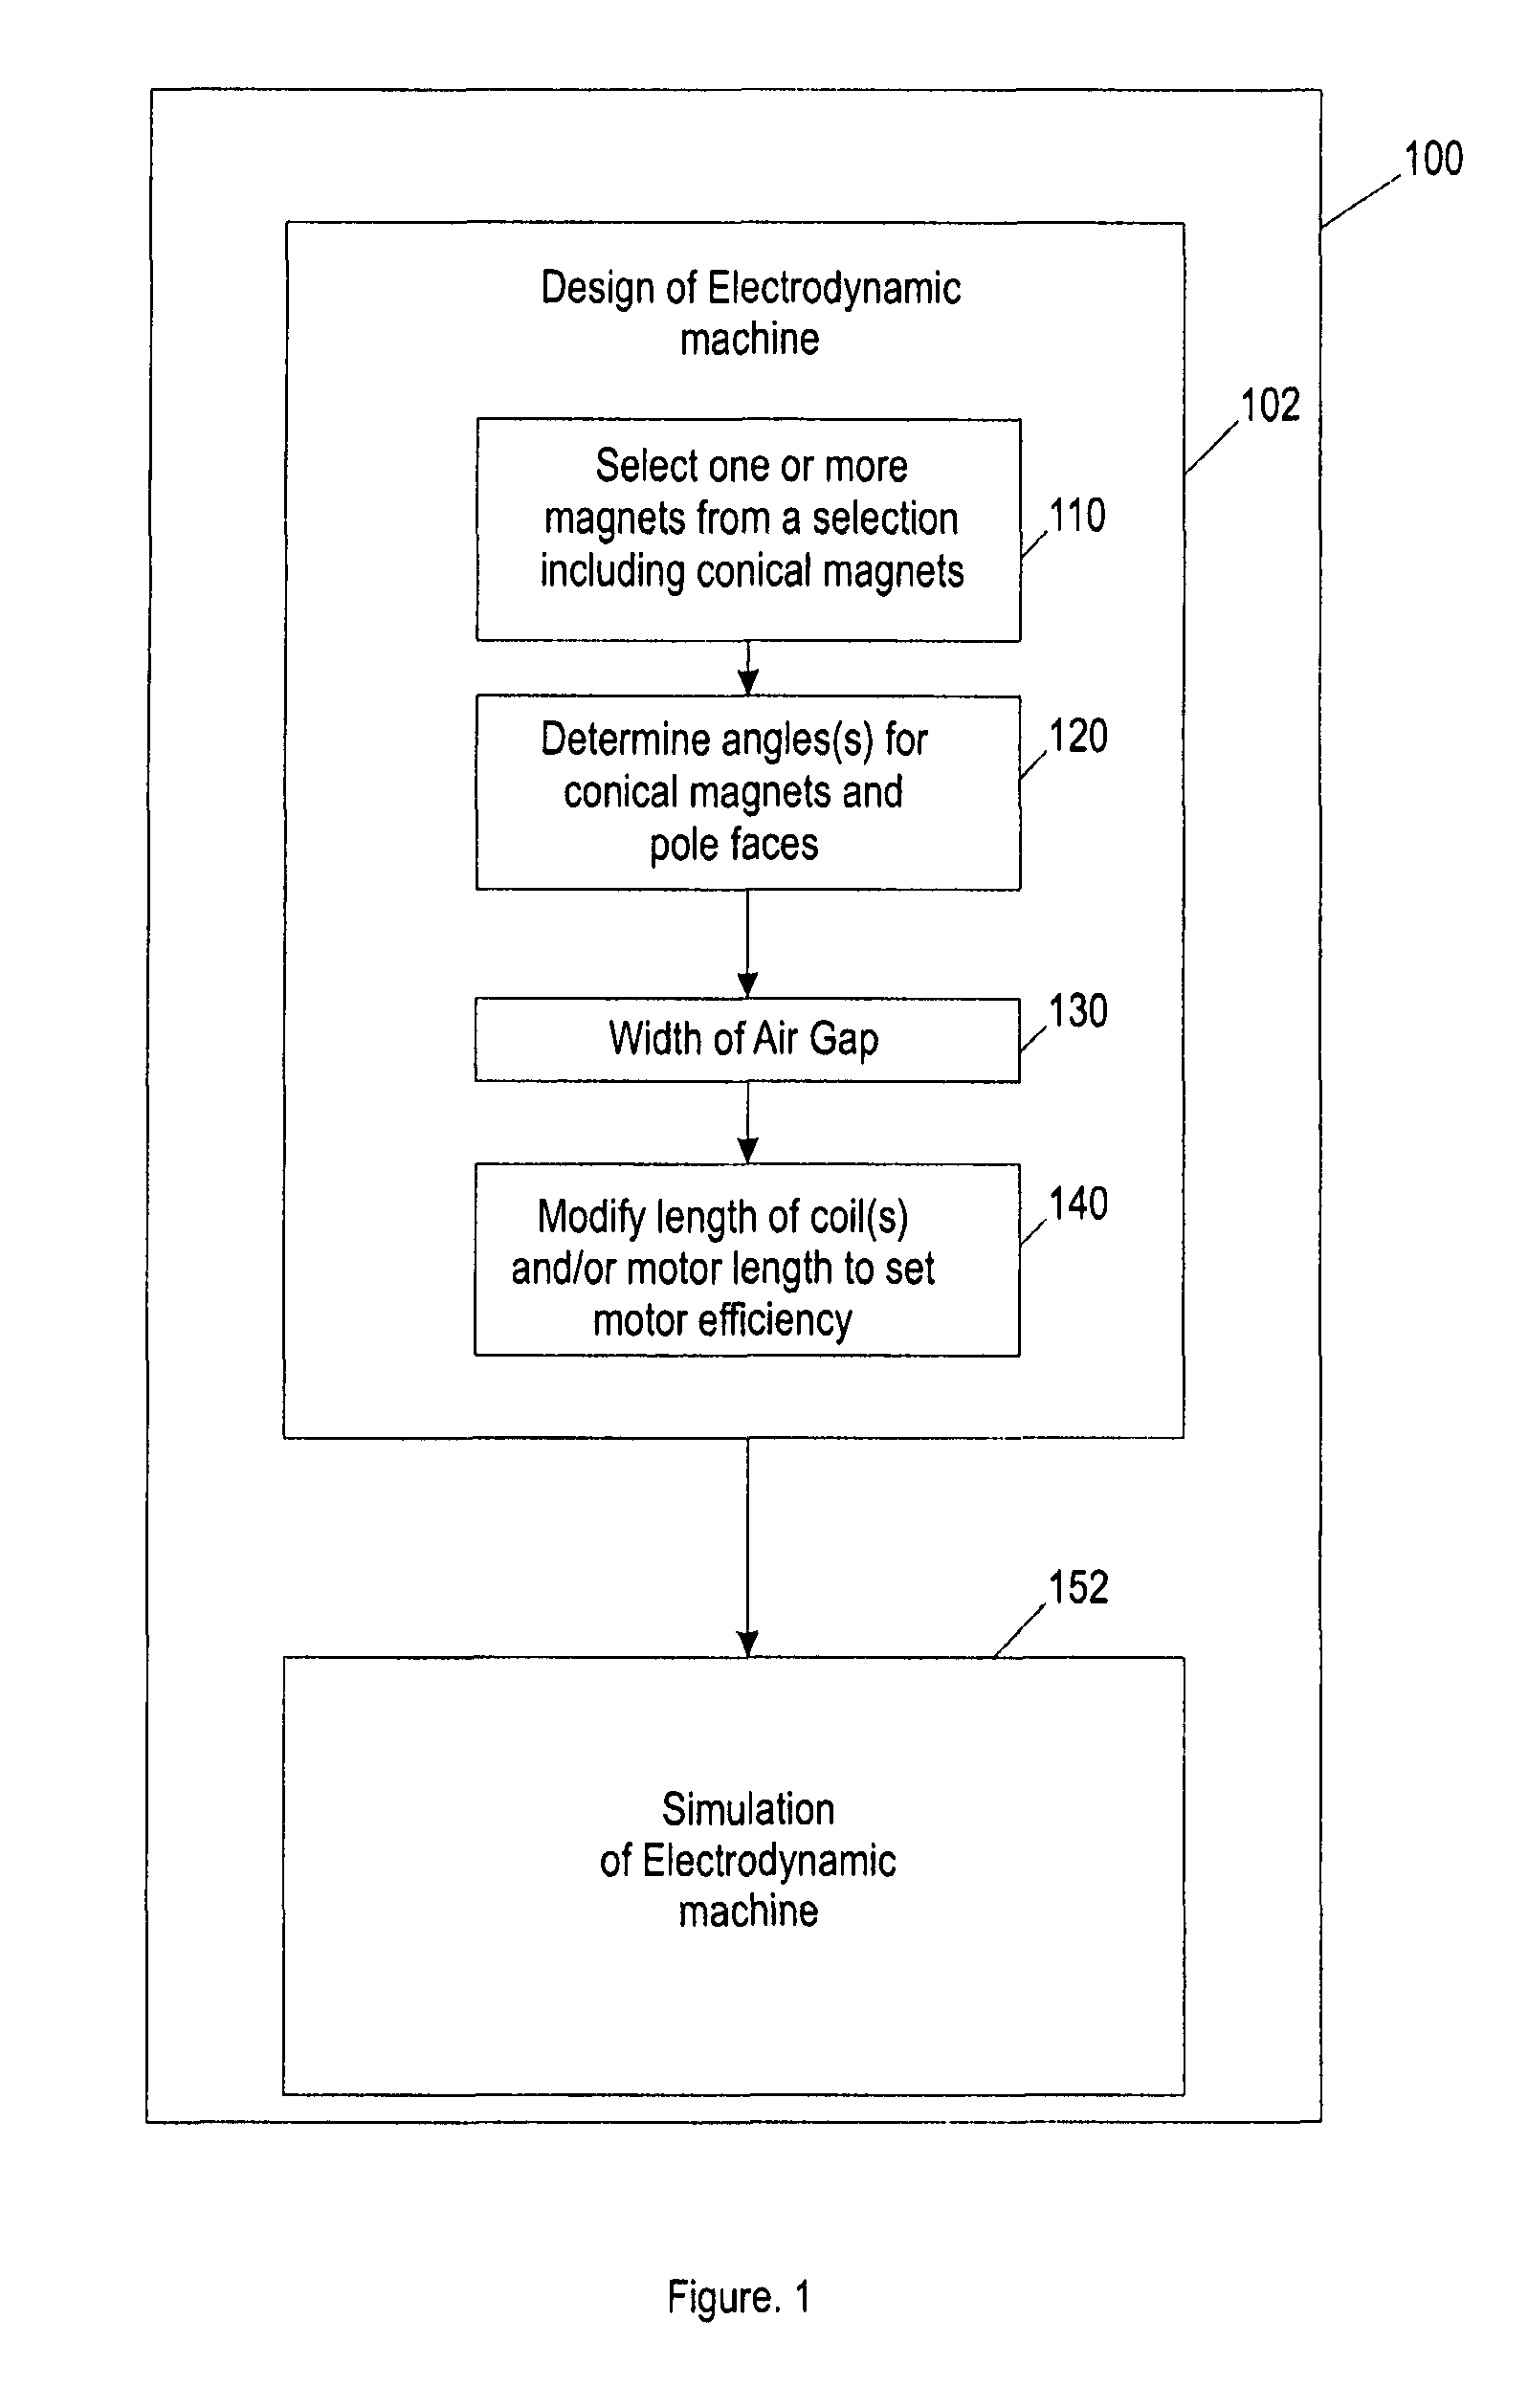 Computer-readable medium, a method and an apparatus for designing and simulating electrodynamic machines implementing conical and cylindrical magnets